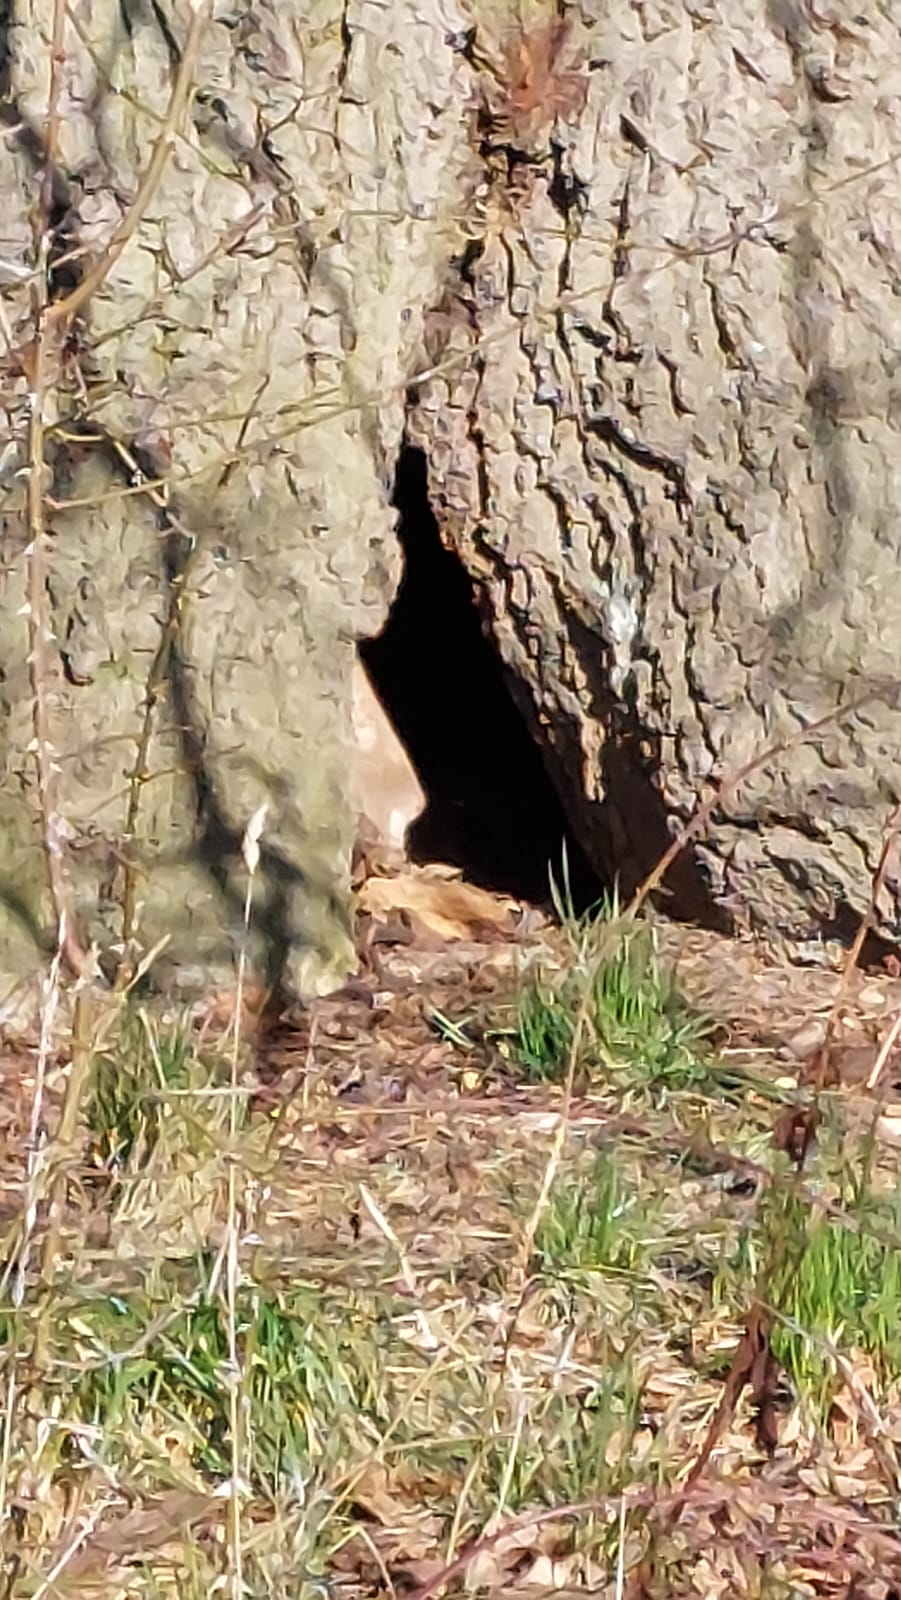 A photograph of an oak tree trunk with a hole in it